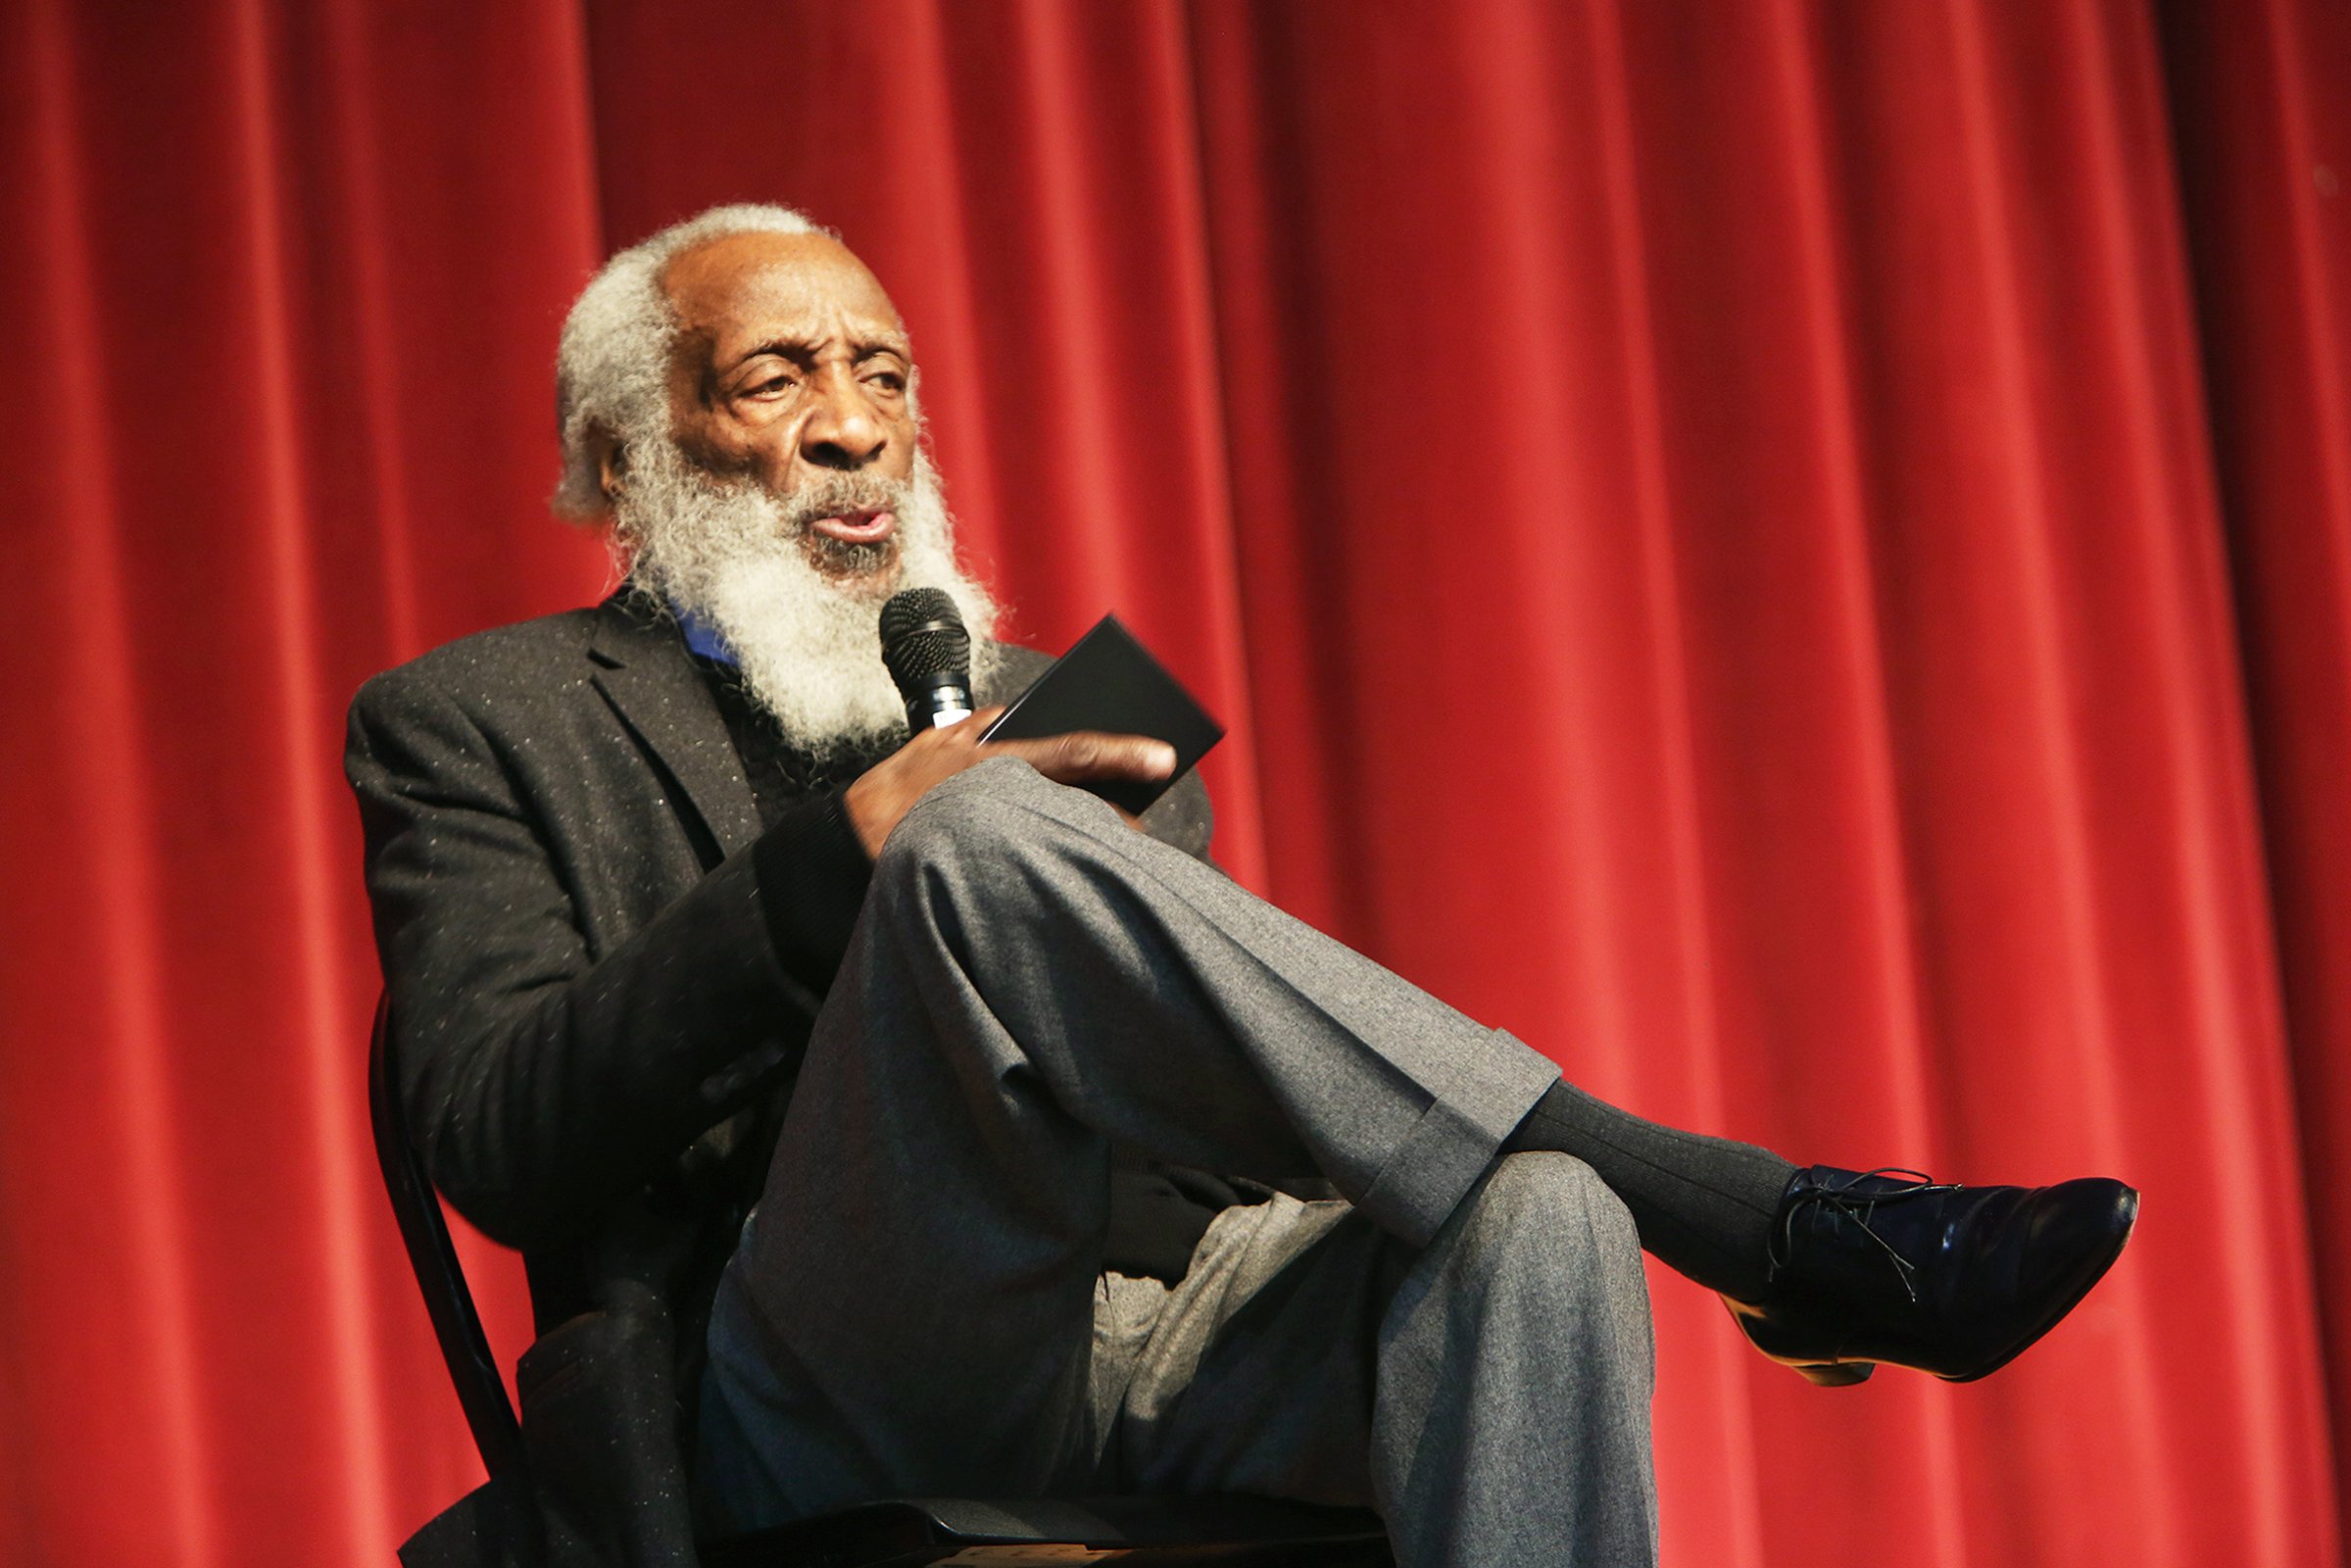 Dick Gregory, long time civil rights activist, writer, social critic, and comedian, talks to the crowd at the 16th annual Tampa Bay Black Heritage Festival, MLK Leadership Luncheon in Tampa, Fla. on Jan. 20, 2016.